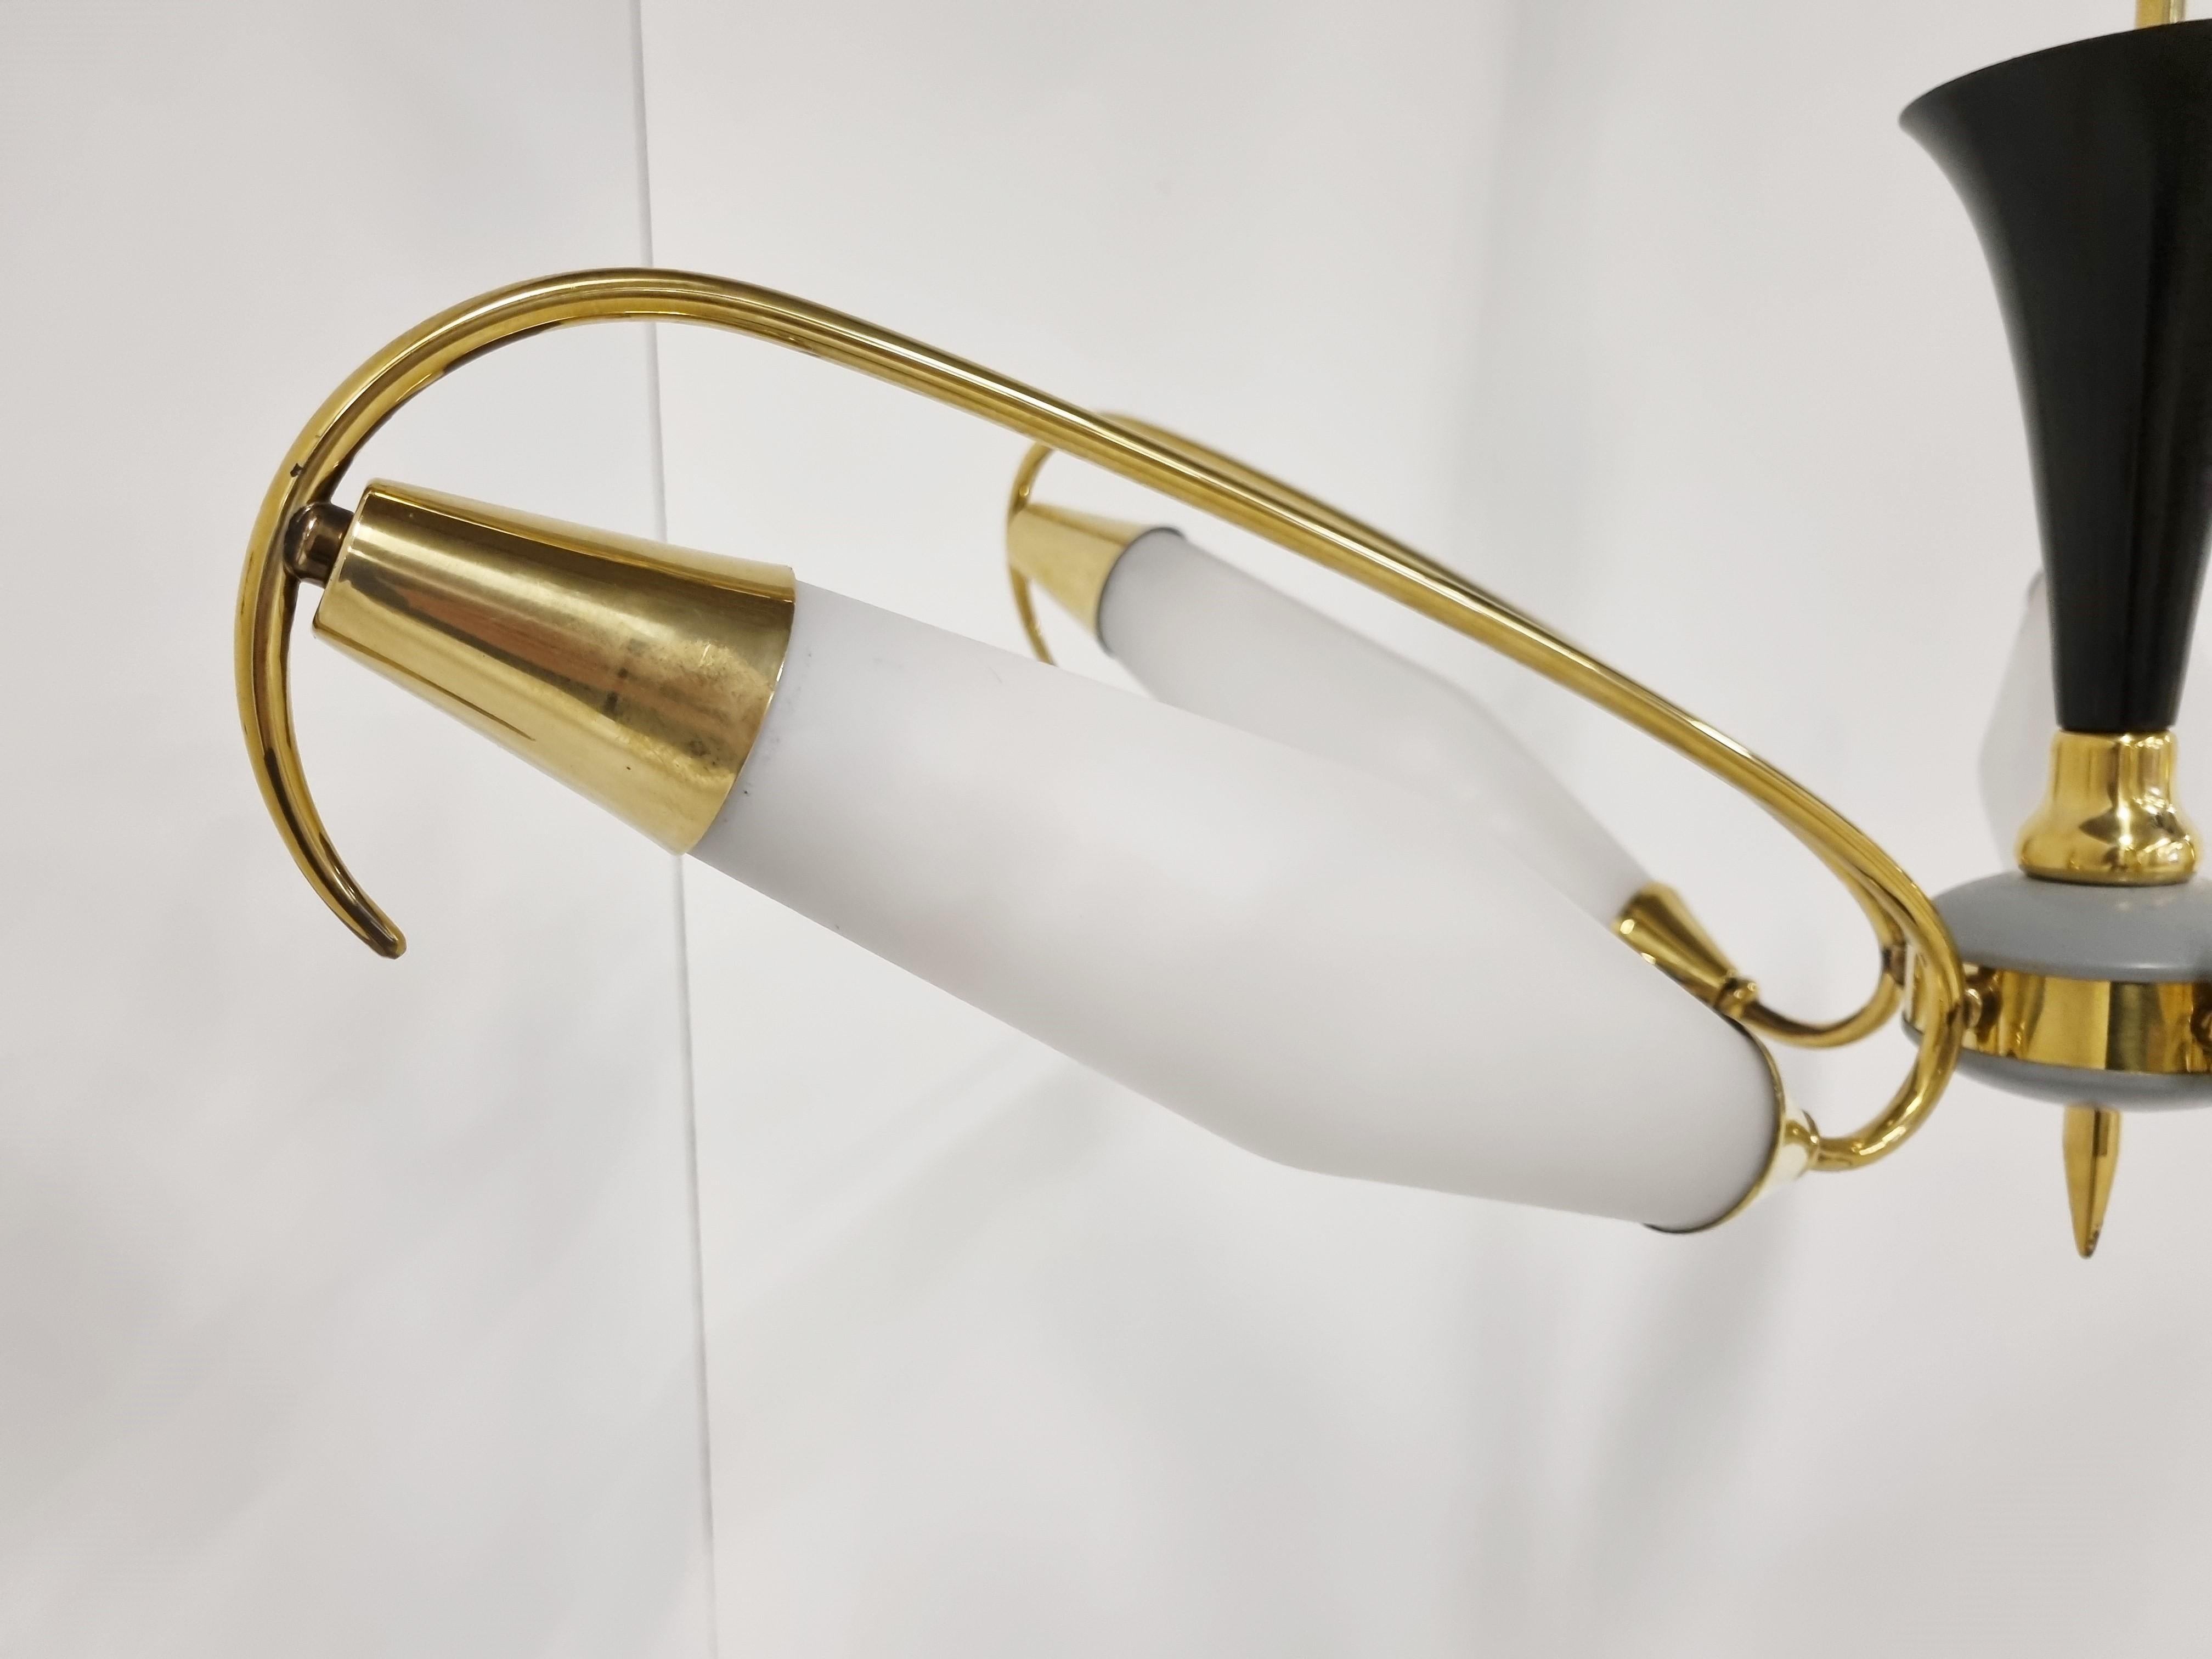 Mid century brass chandelier with 5 arms and white glass shades. 

Striking design and it emits a beautiful light.

Good condition.

Tested and ready to use. 

Works with two e14 light bulbs.

1960s - Italy

Dimensions:

Height: